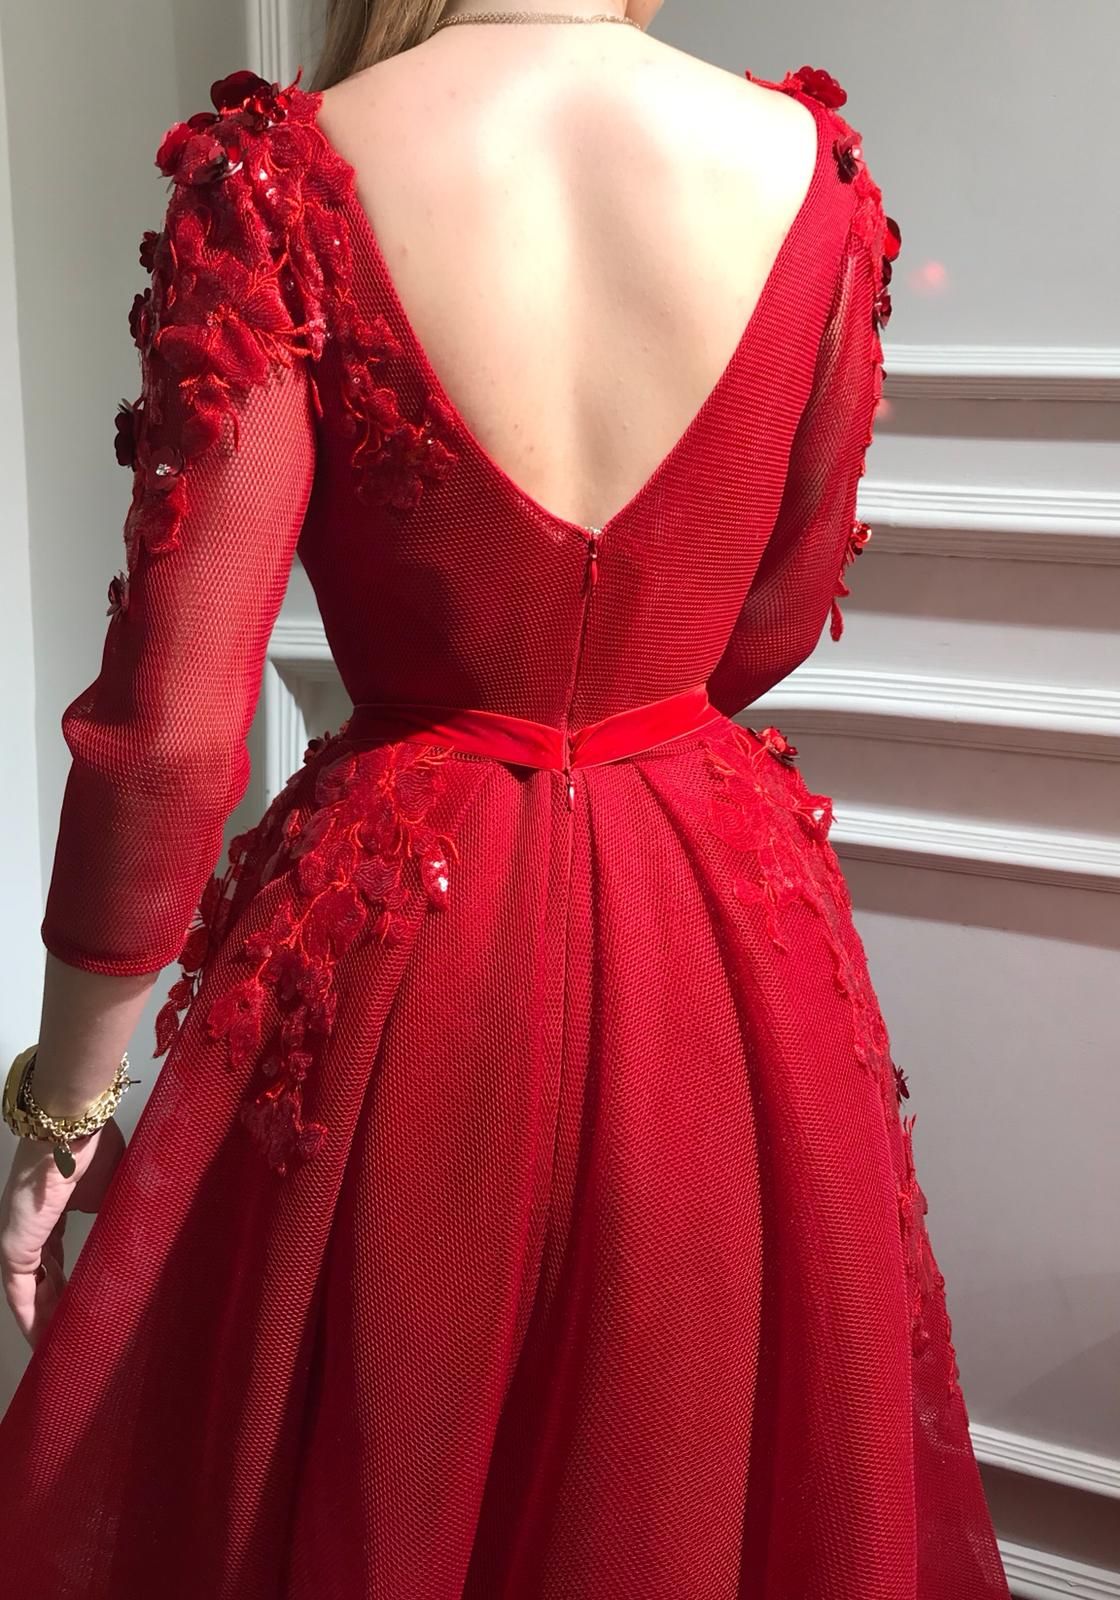 Red overskirt dress with long sleeves, v-neck and embroidery